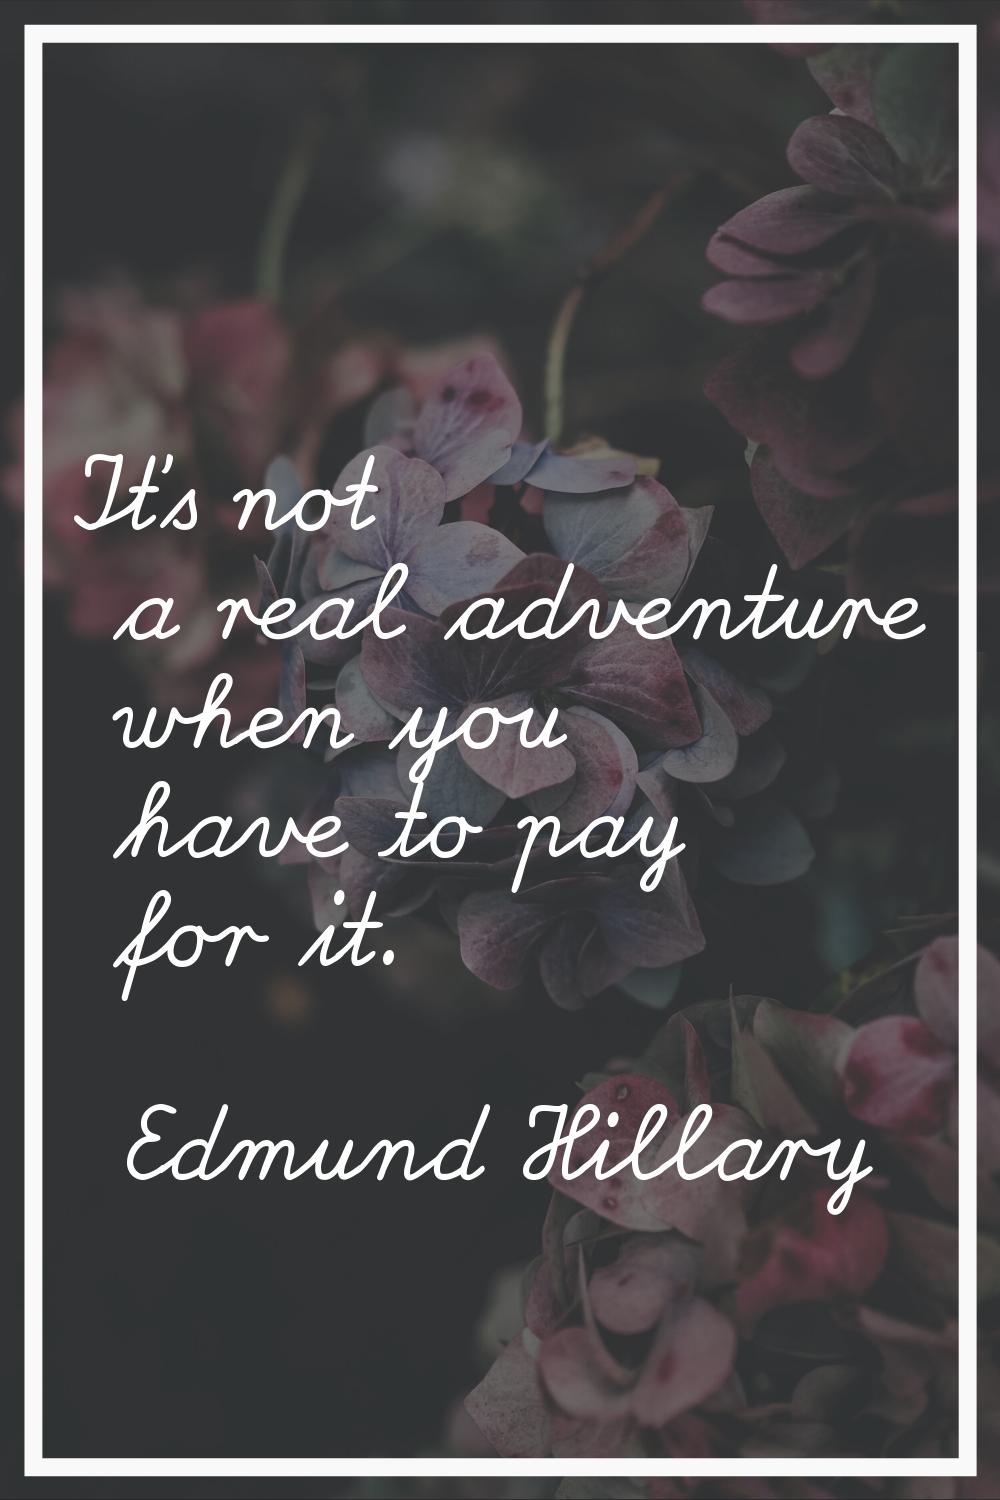 It's not a real adventure when you have to pay for it.